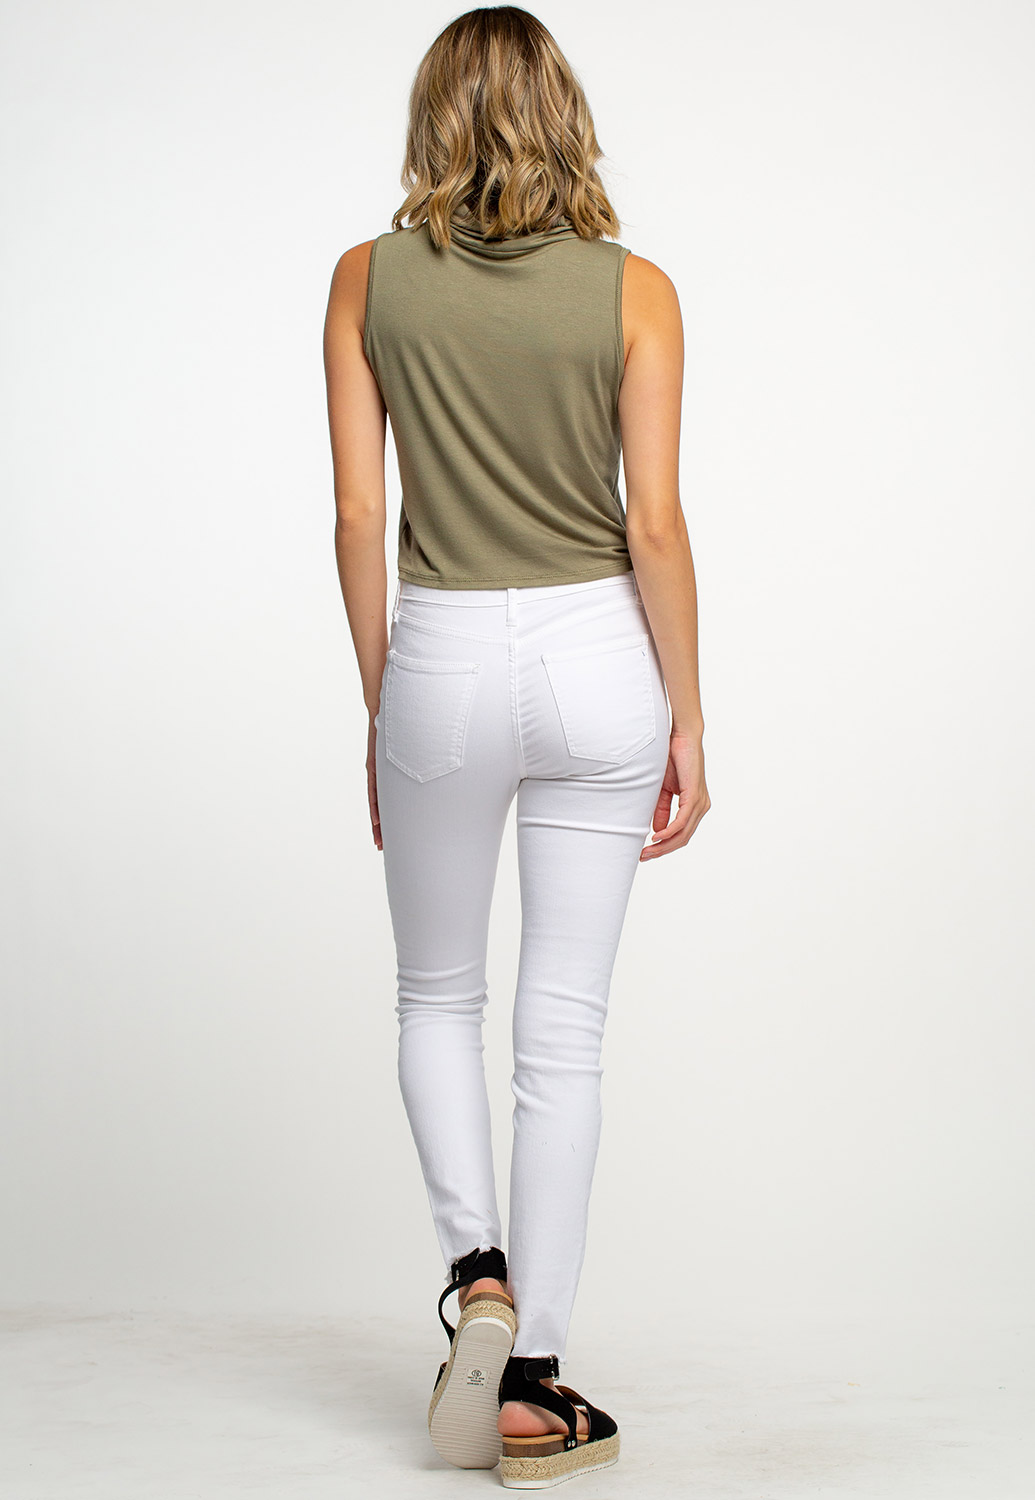 Face Cover Up Cowl Neck Tank Crop Top